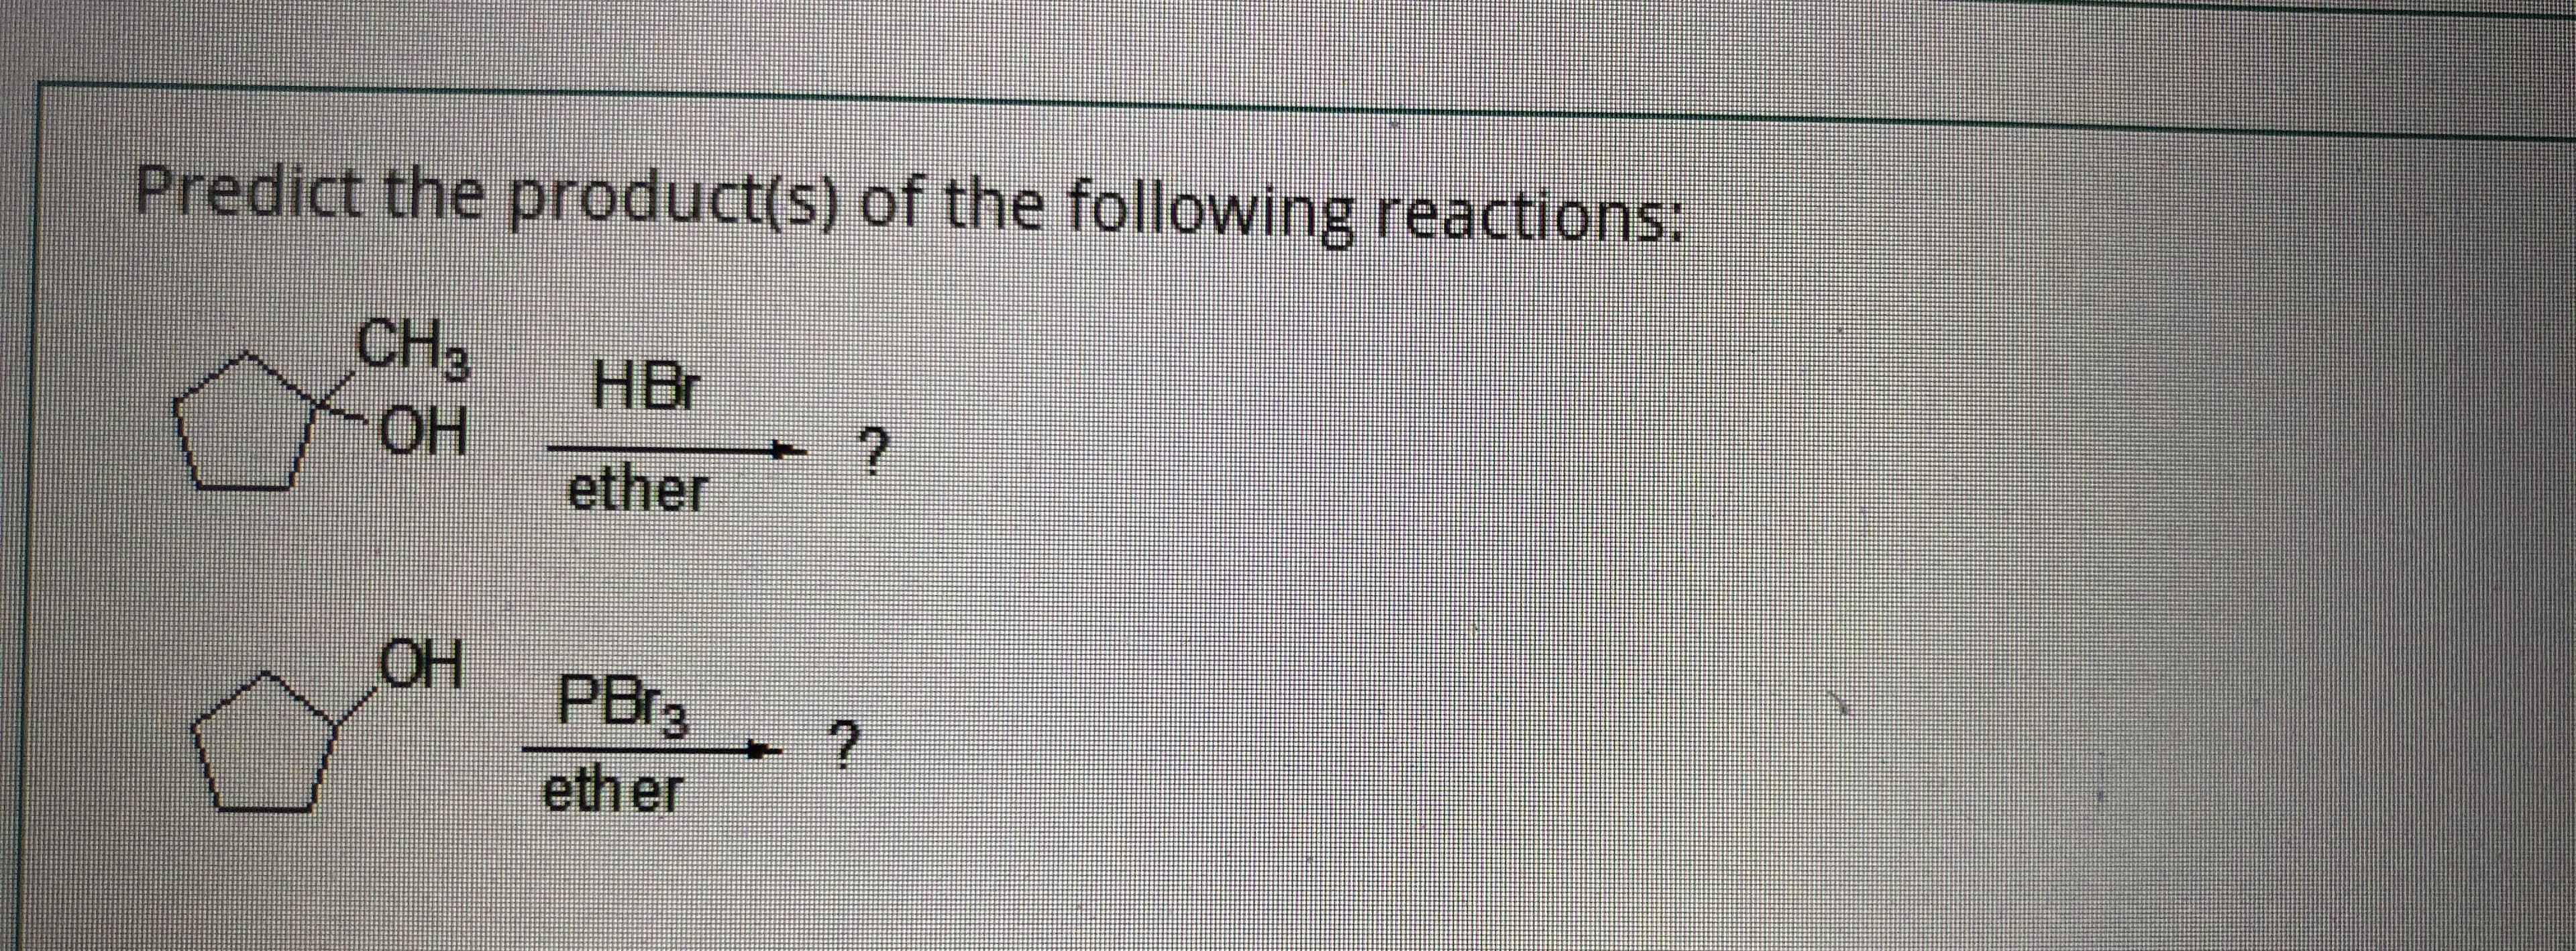 Predict the product(s) of the following reactions:
